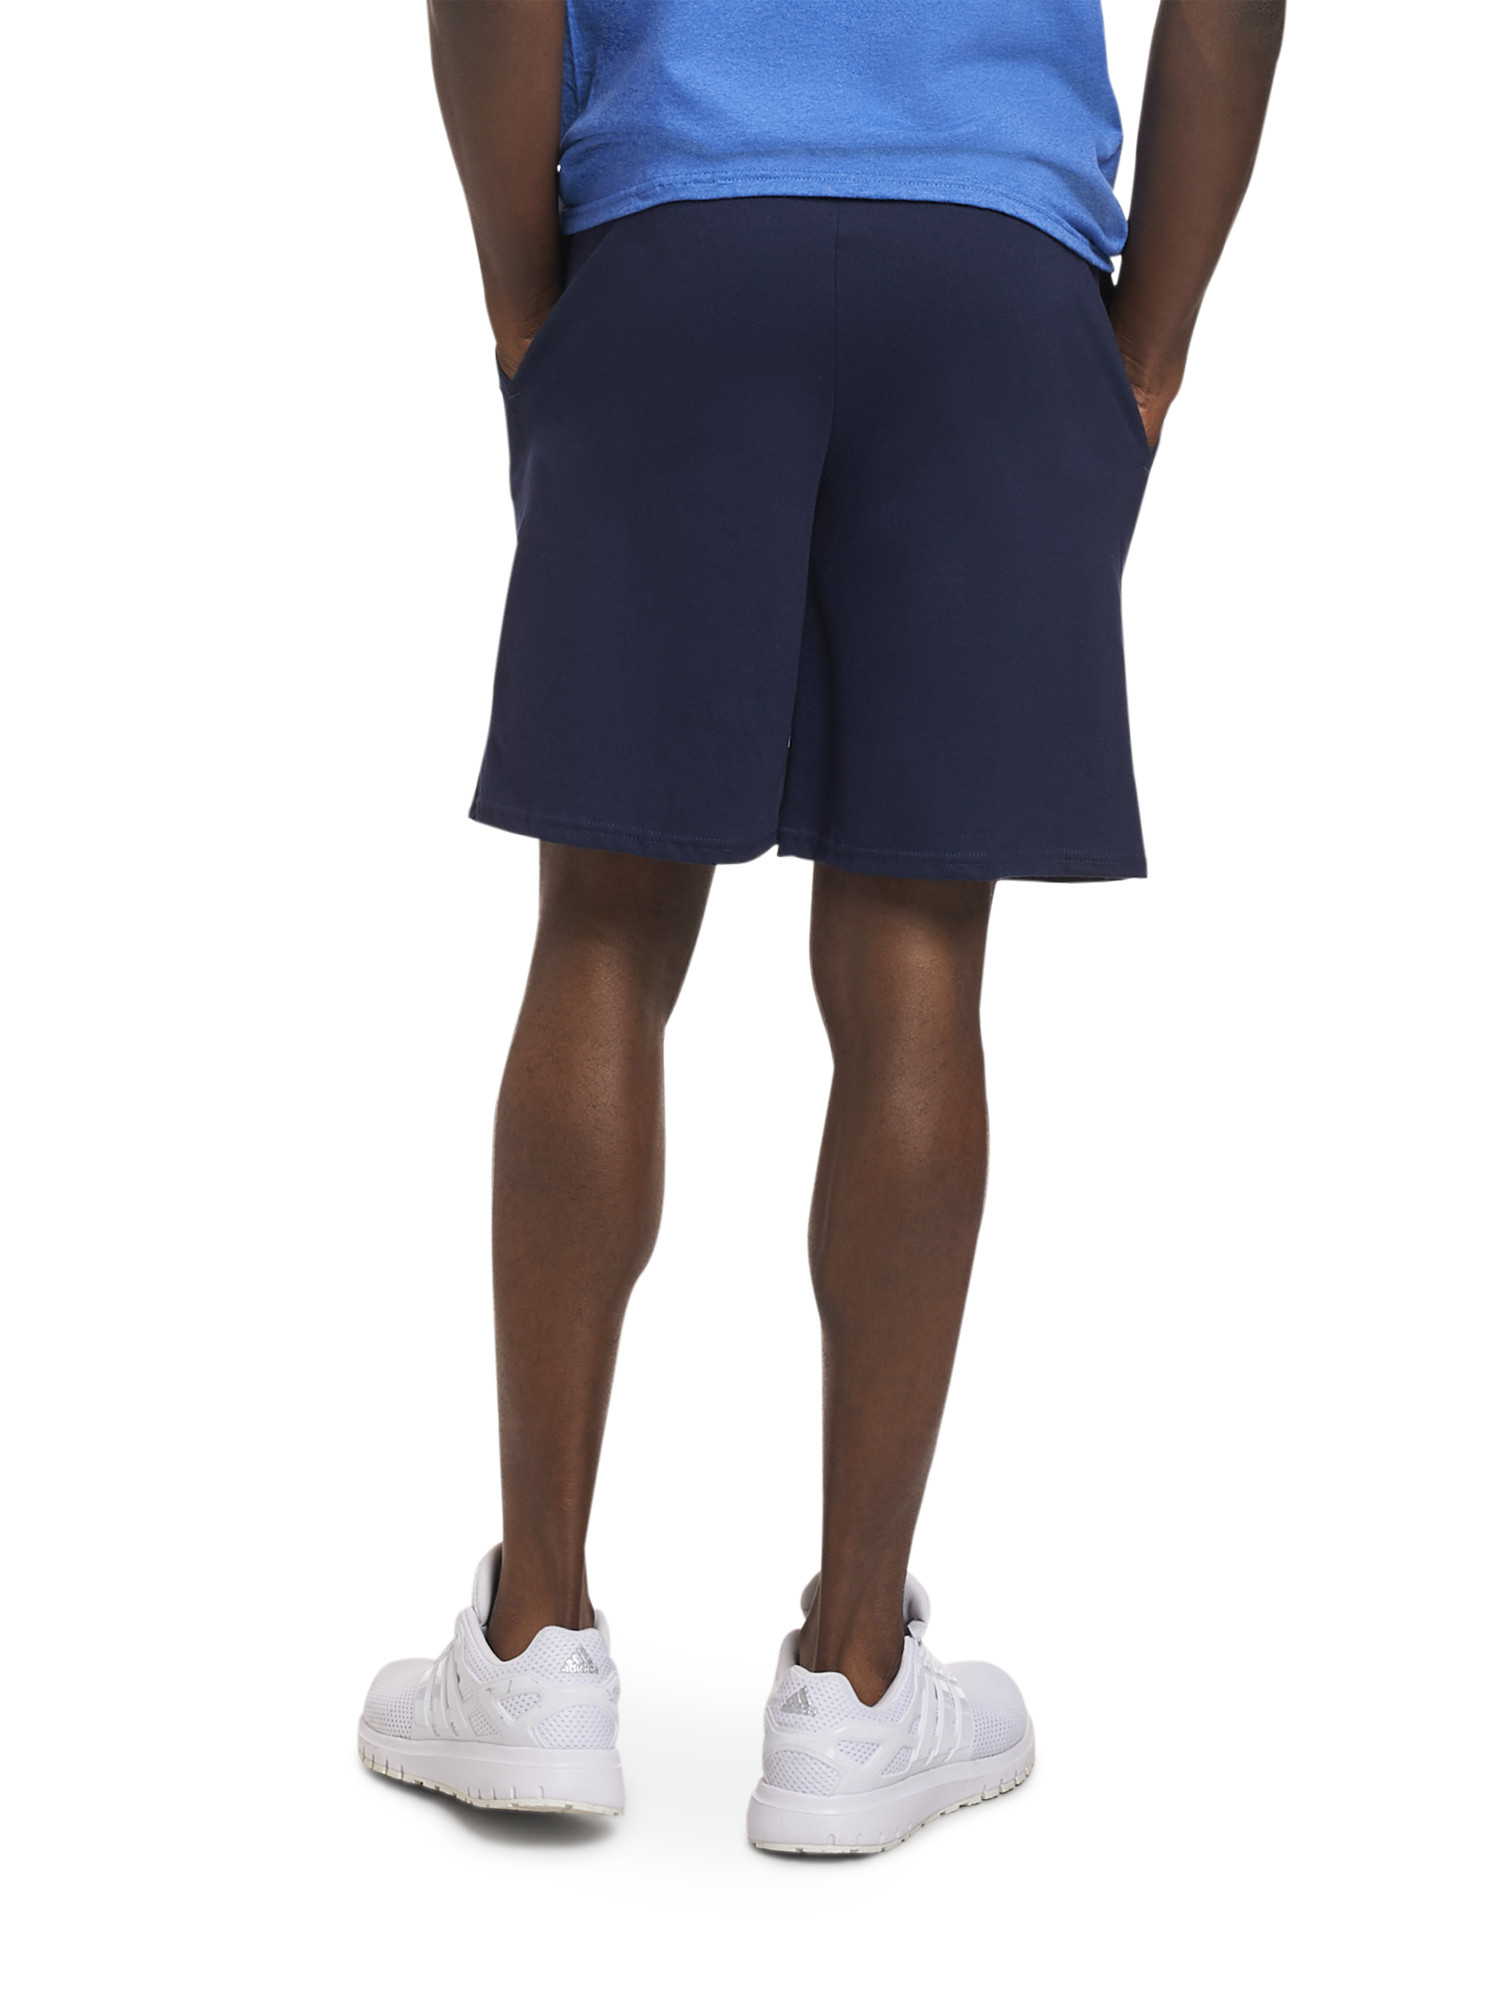 Russell Athletic Men's and Big Men's Basic Cotton Pocket Shorts - image 3 of 5